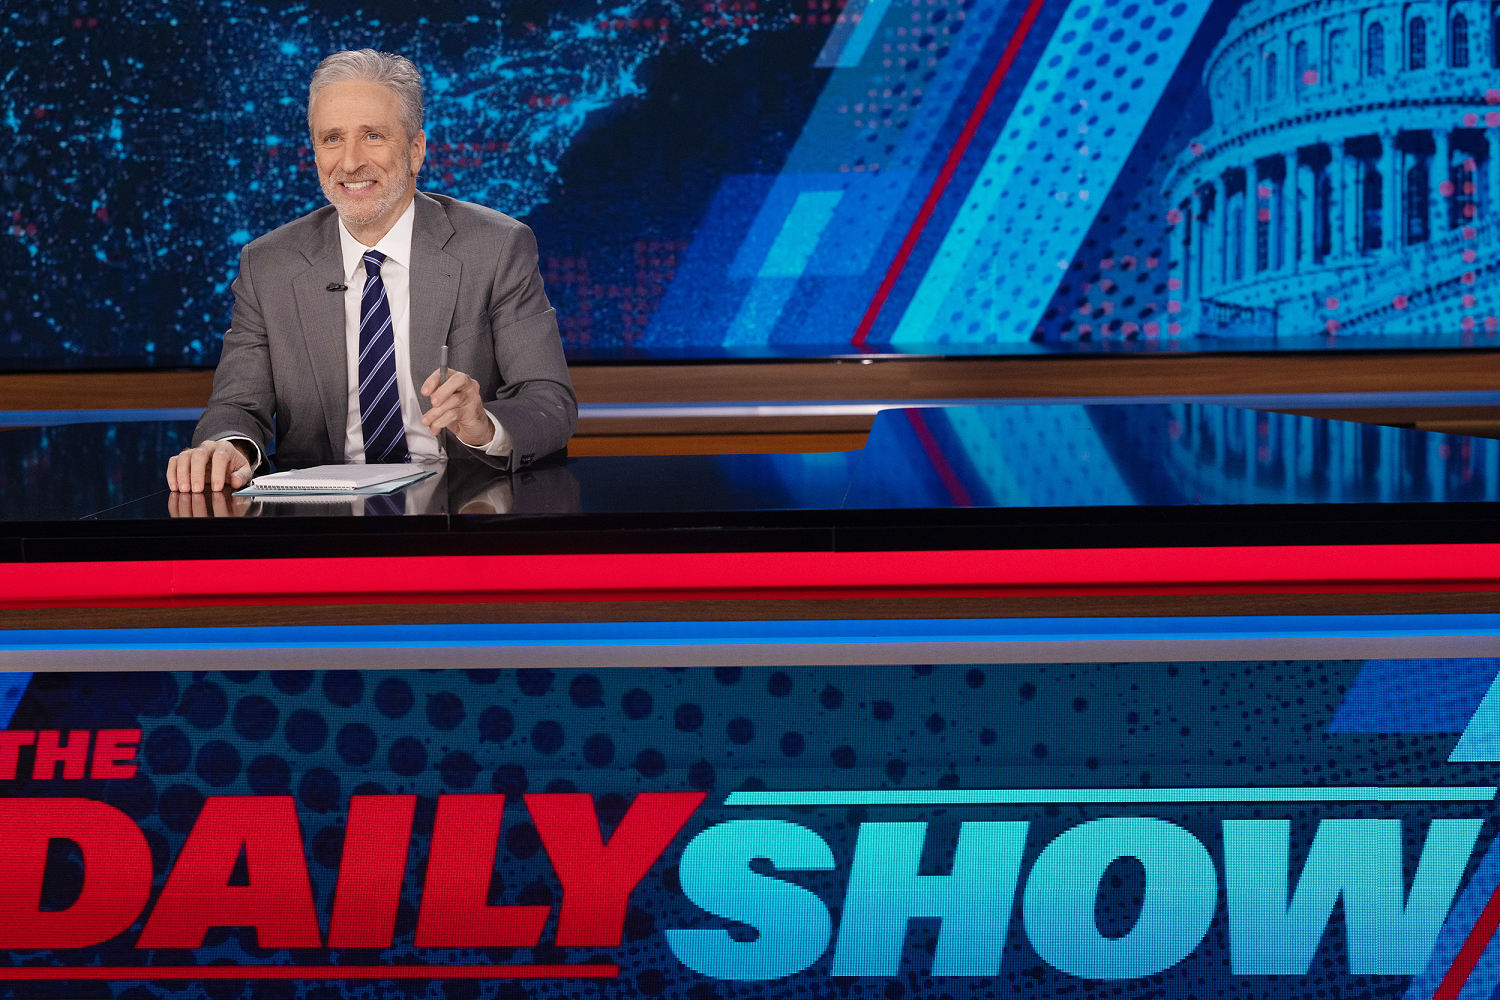 Jon Stewart's third episode was an uncomfortable reminder that some things just aren't funny